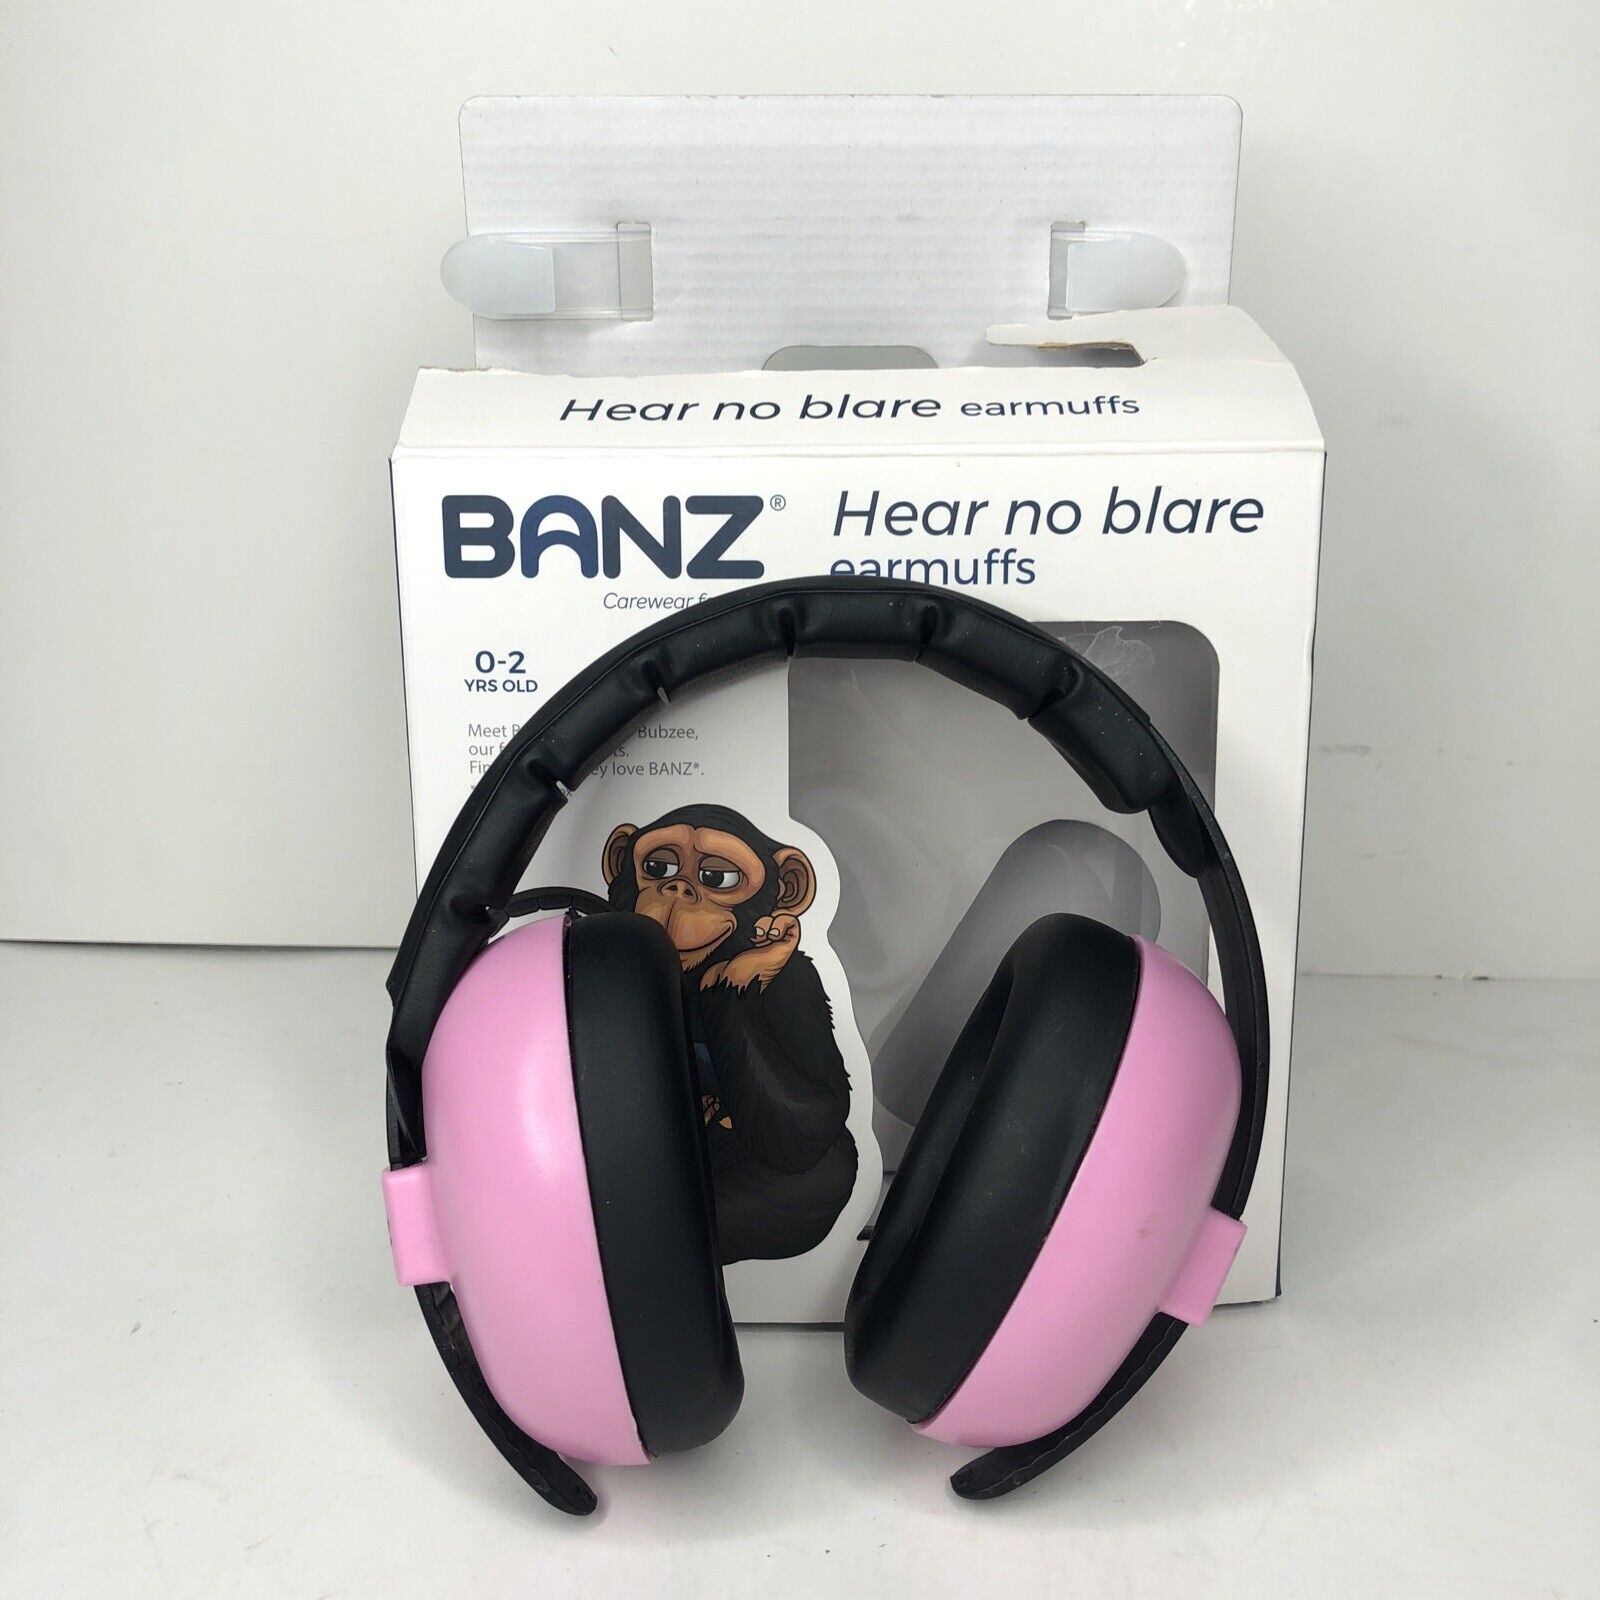 Baby Banz Hear No Blare Earmuffs For 0-2 Years Old Pink W/ Box Carewear For Kids